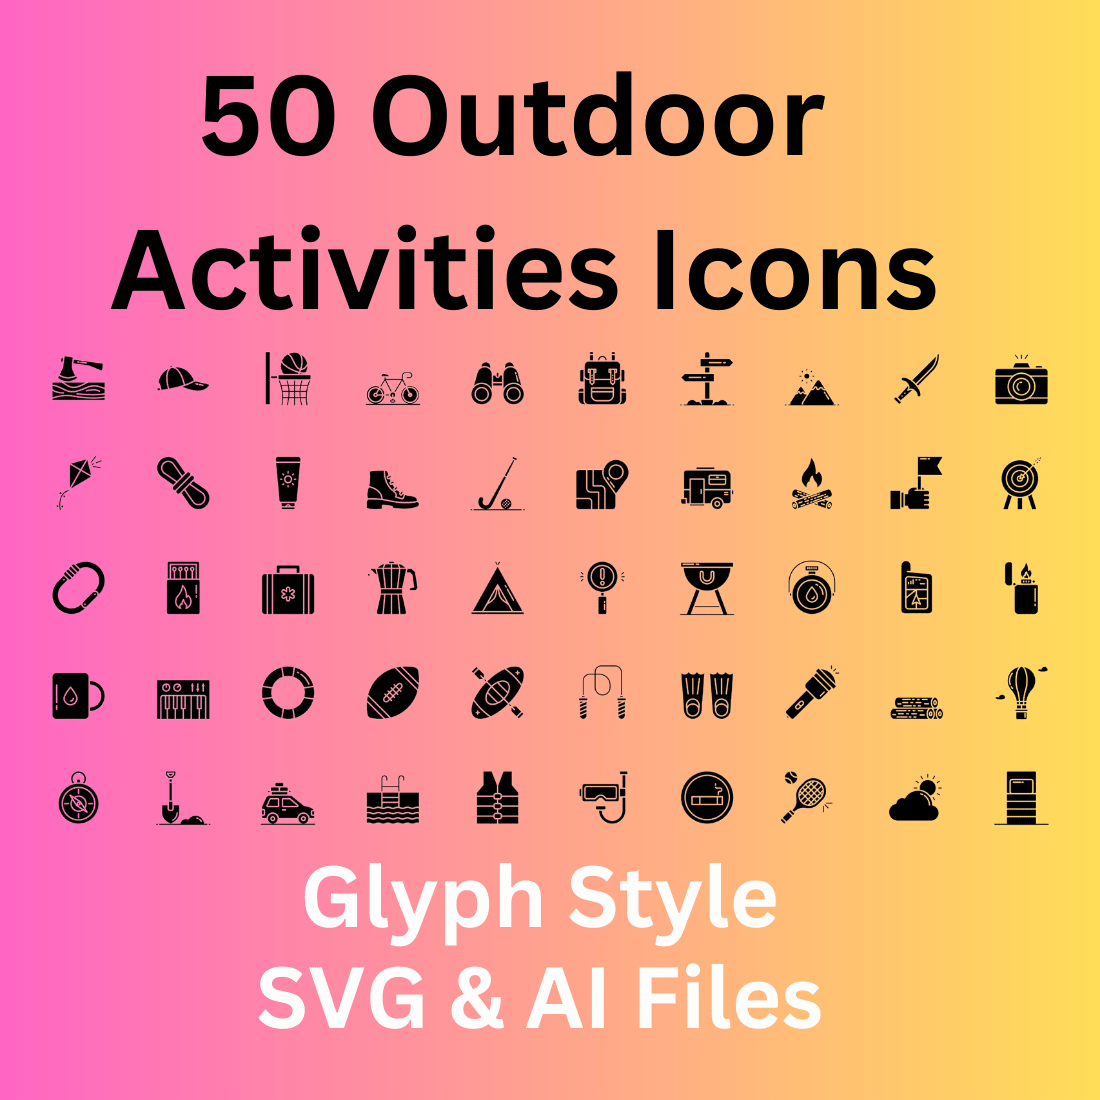 Outdoor Activities Icon Set 50 Glyph Icons - SVG And AI Files cover image.